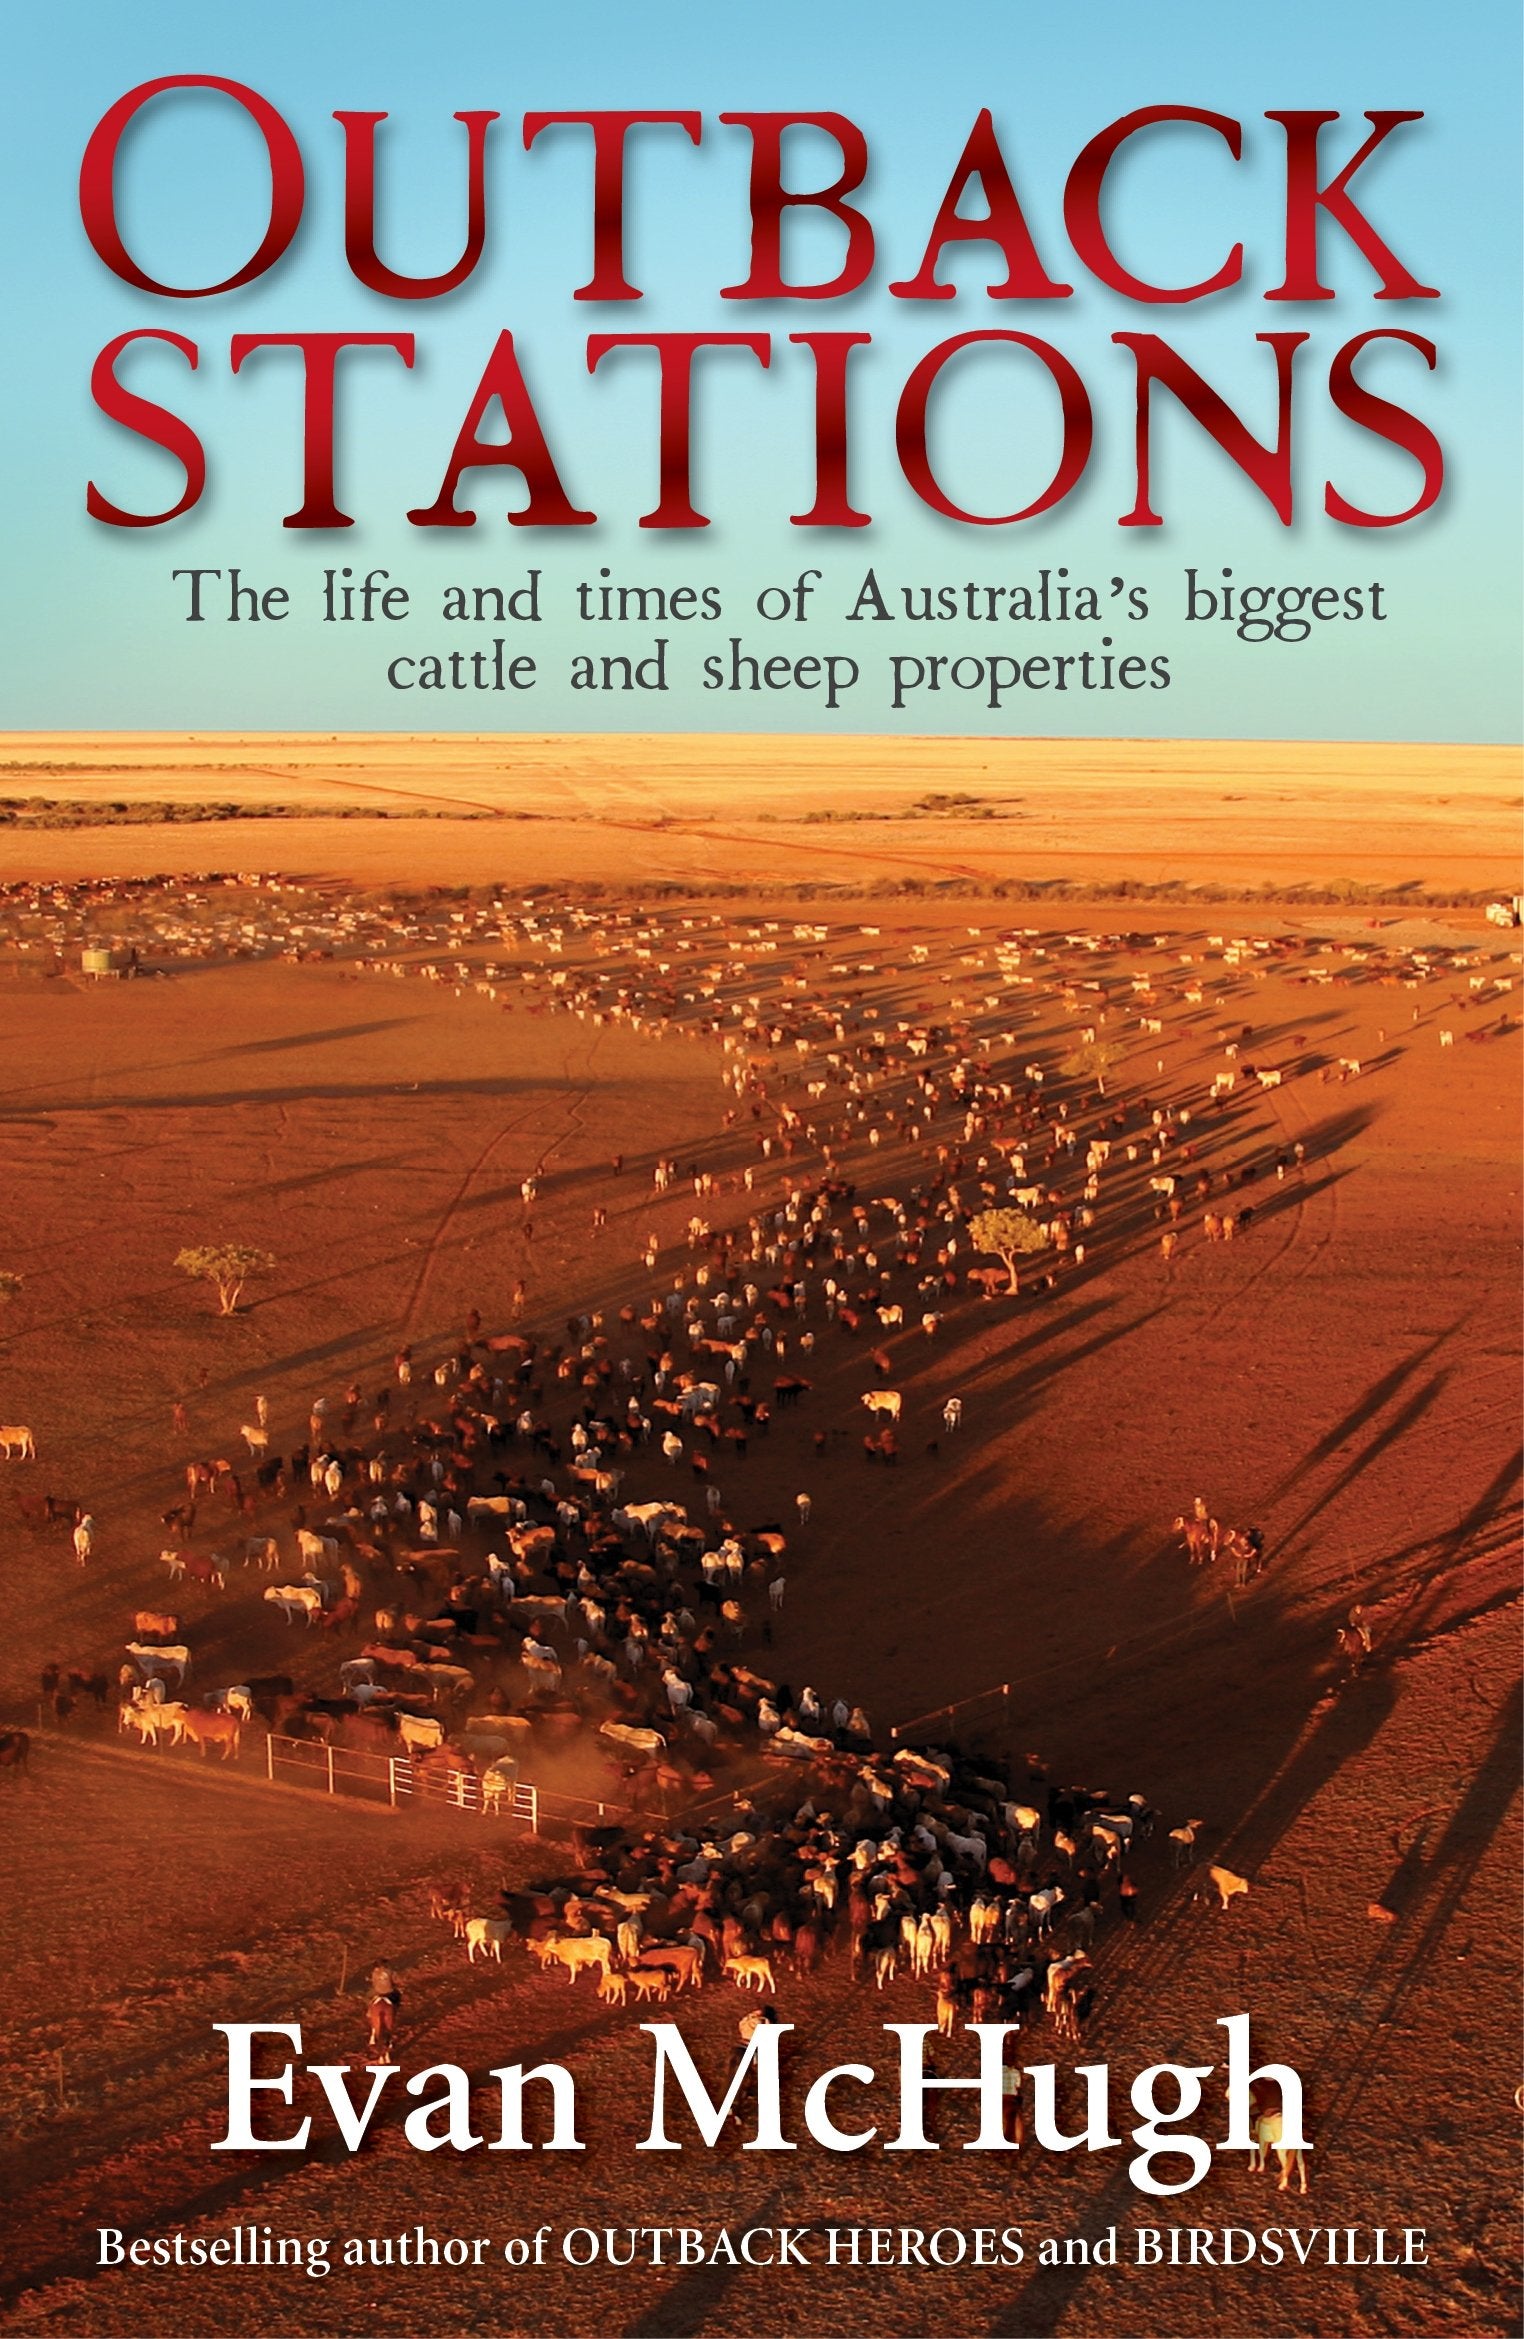 Outback Stations